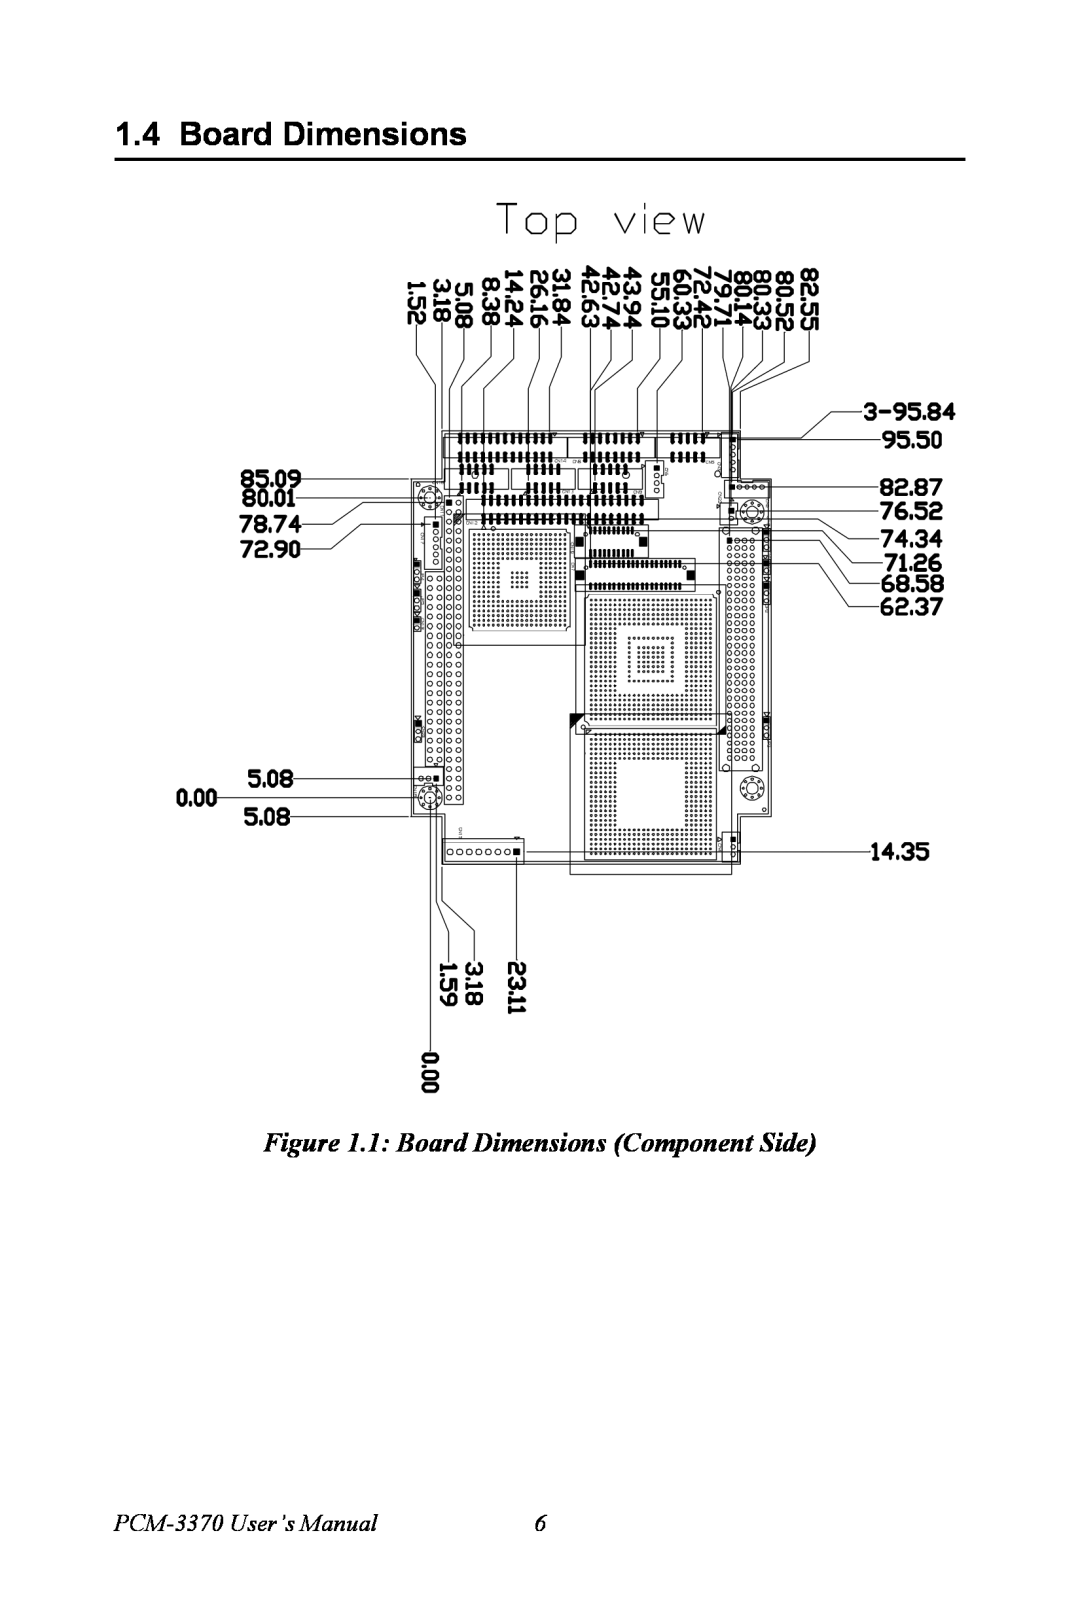 Intel user manual 1 Board Dimensions Component Side, PCM-3370 User’s Manual 